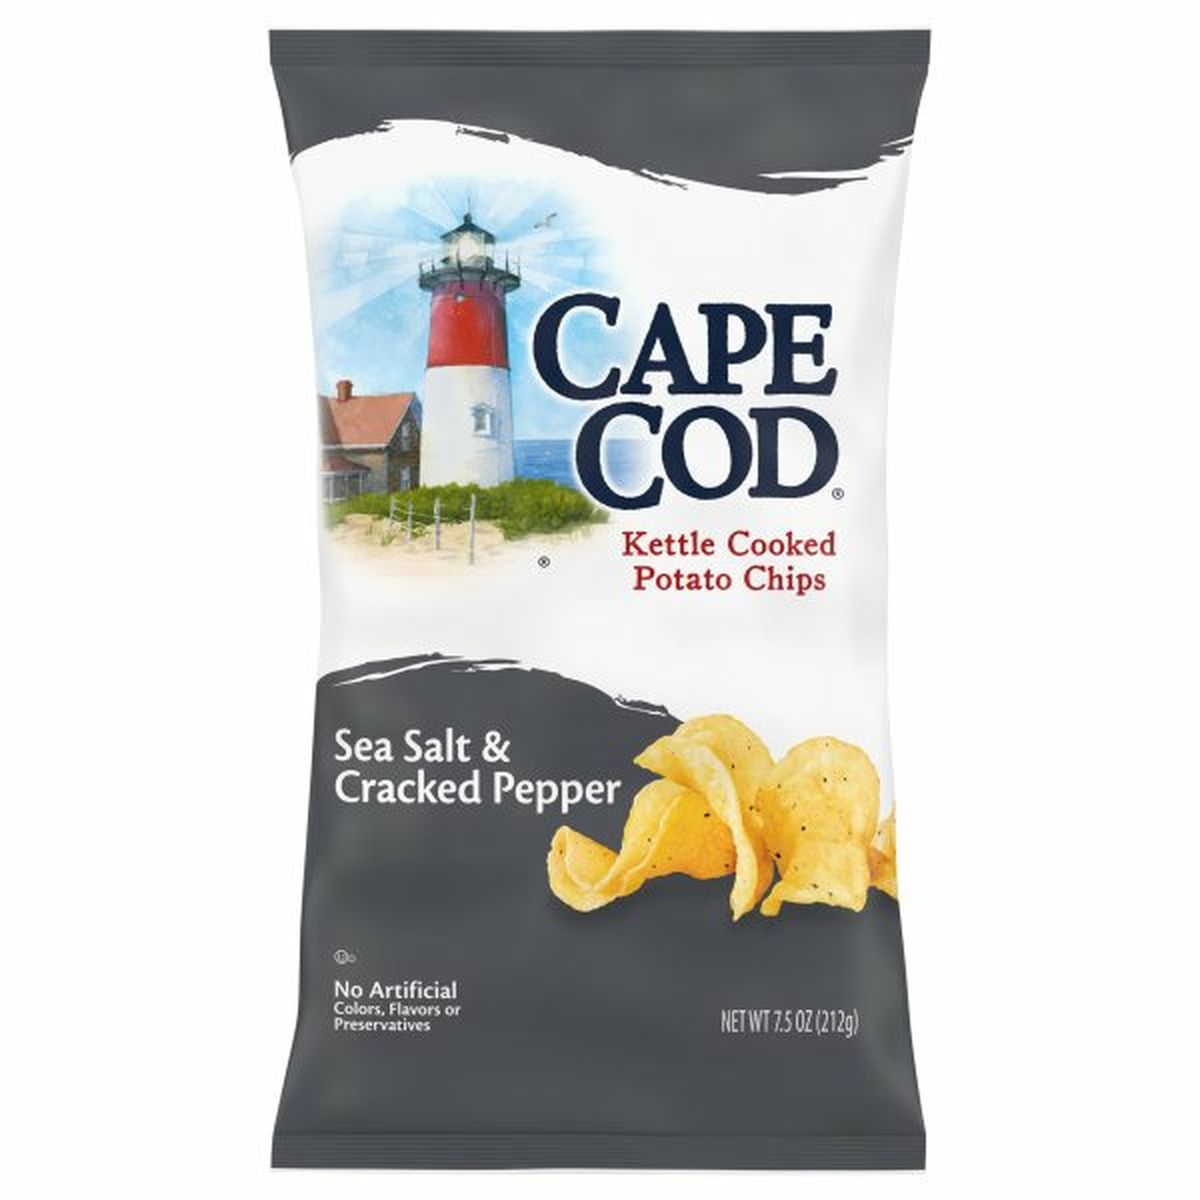 Calories in Cape Cods Potato Chips, Kettle Cooked, Sea Salt & Cracked Pepper